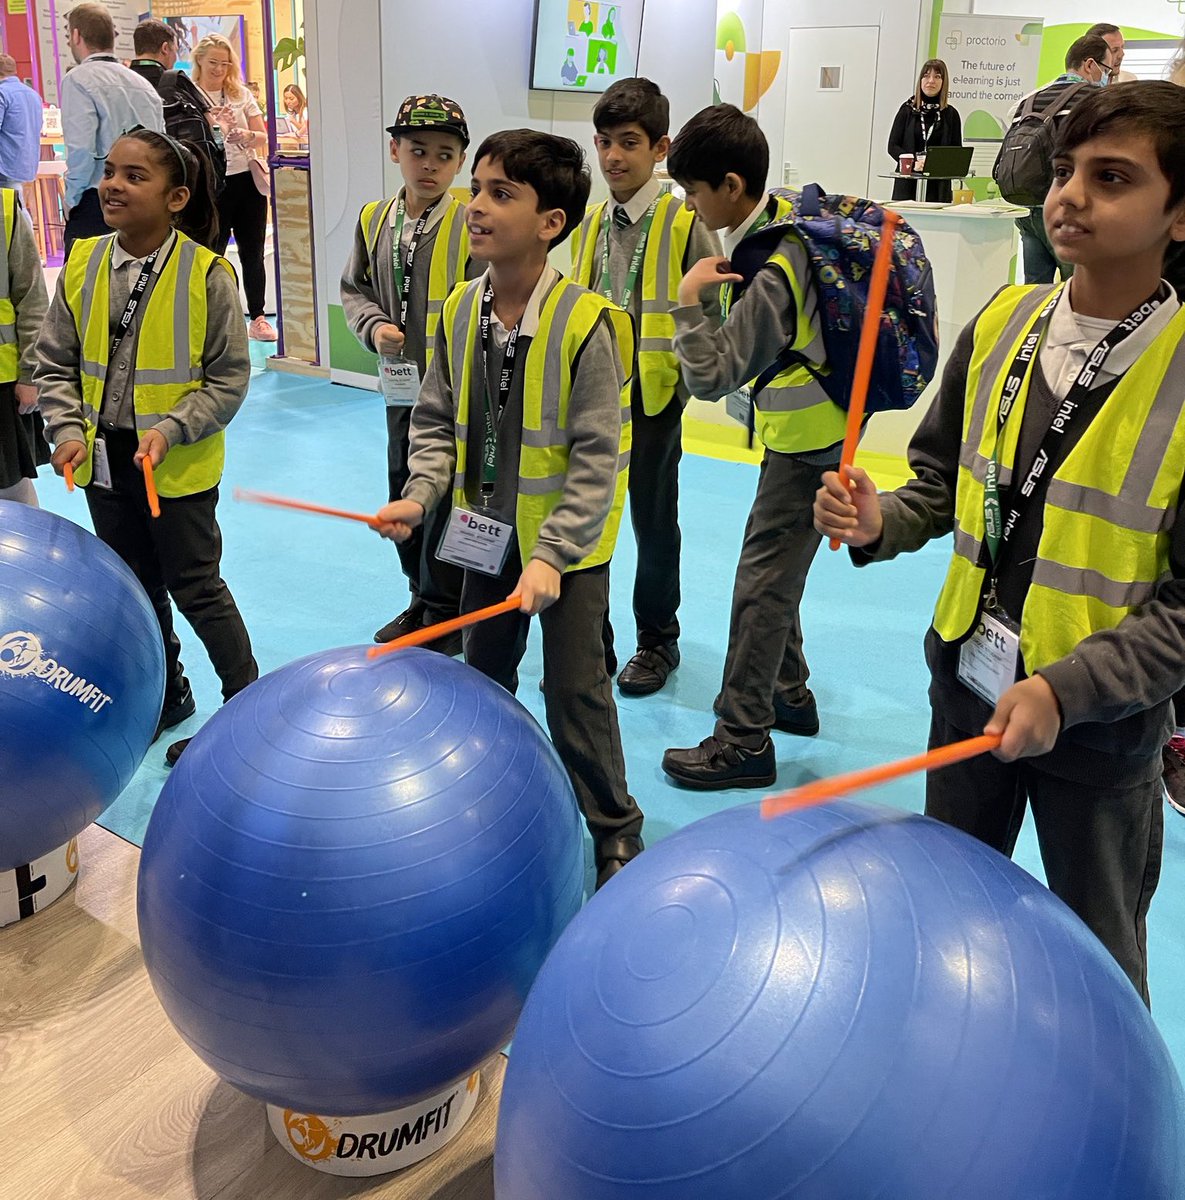 Our Digital Leaders from @ManorParkSchSM1 had a great time meeting the team at @drumfit today at @Bett_show. They were so impressed they’ve nominated them to @katypotts to be part of the #KidsJudgeBett shortlist. 👏 

#Bett2020 @MrsShirley8👇👇👇